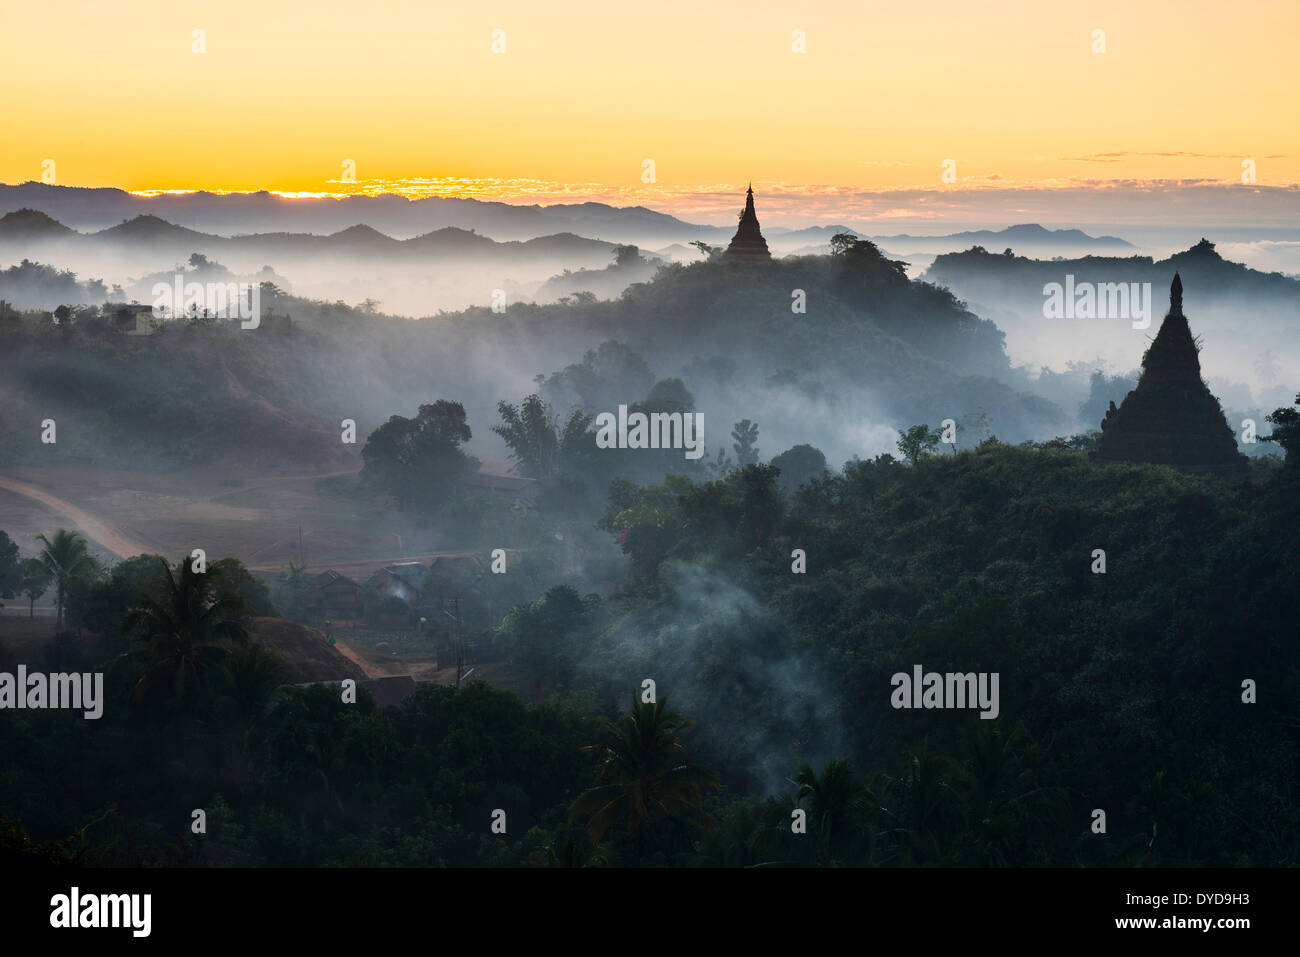 Pagodas surrounded by trees, in the mist, Mrauk U, Sittwe District, Rakhine State, Myanmar Stock Photo